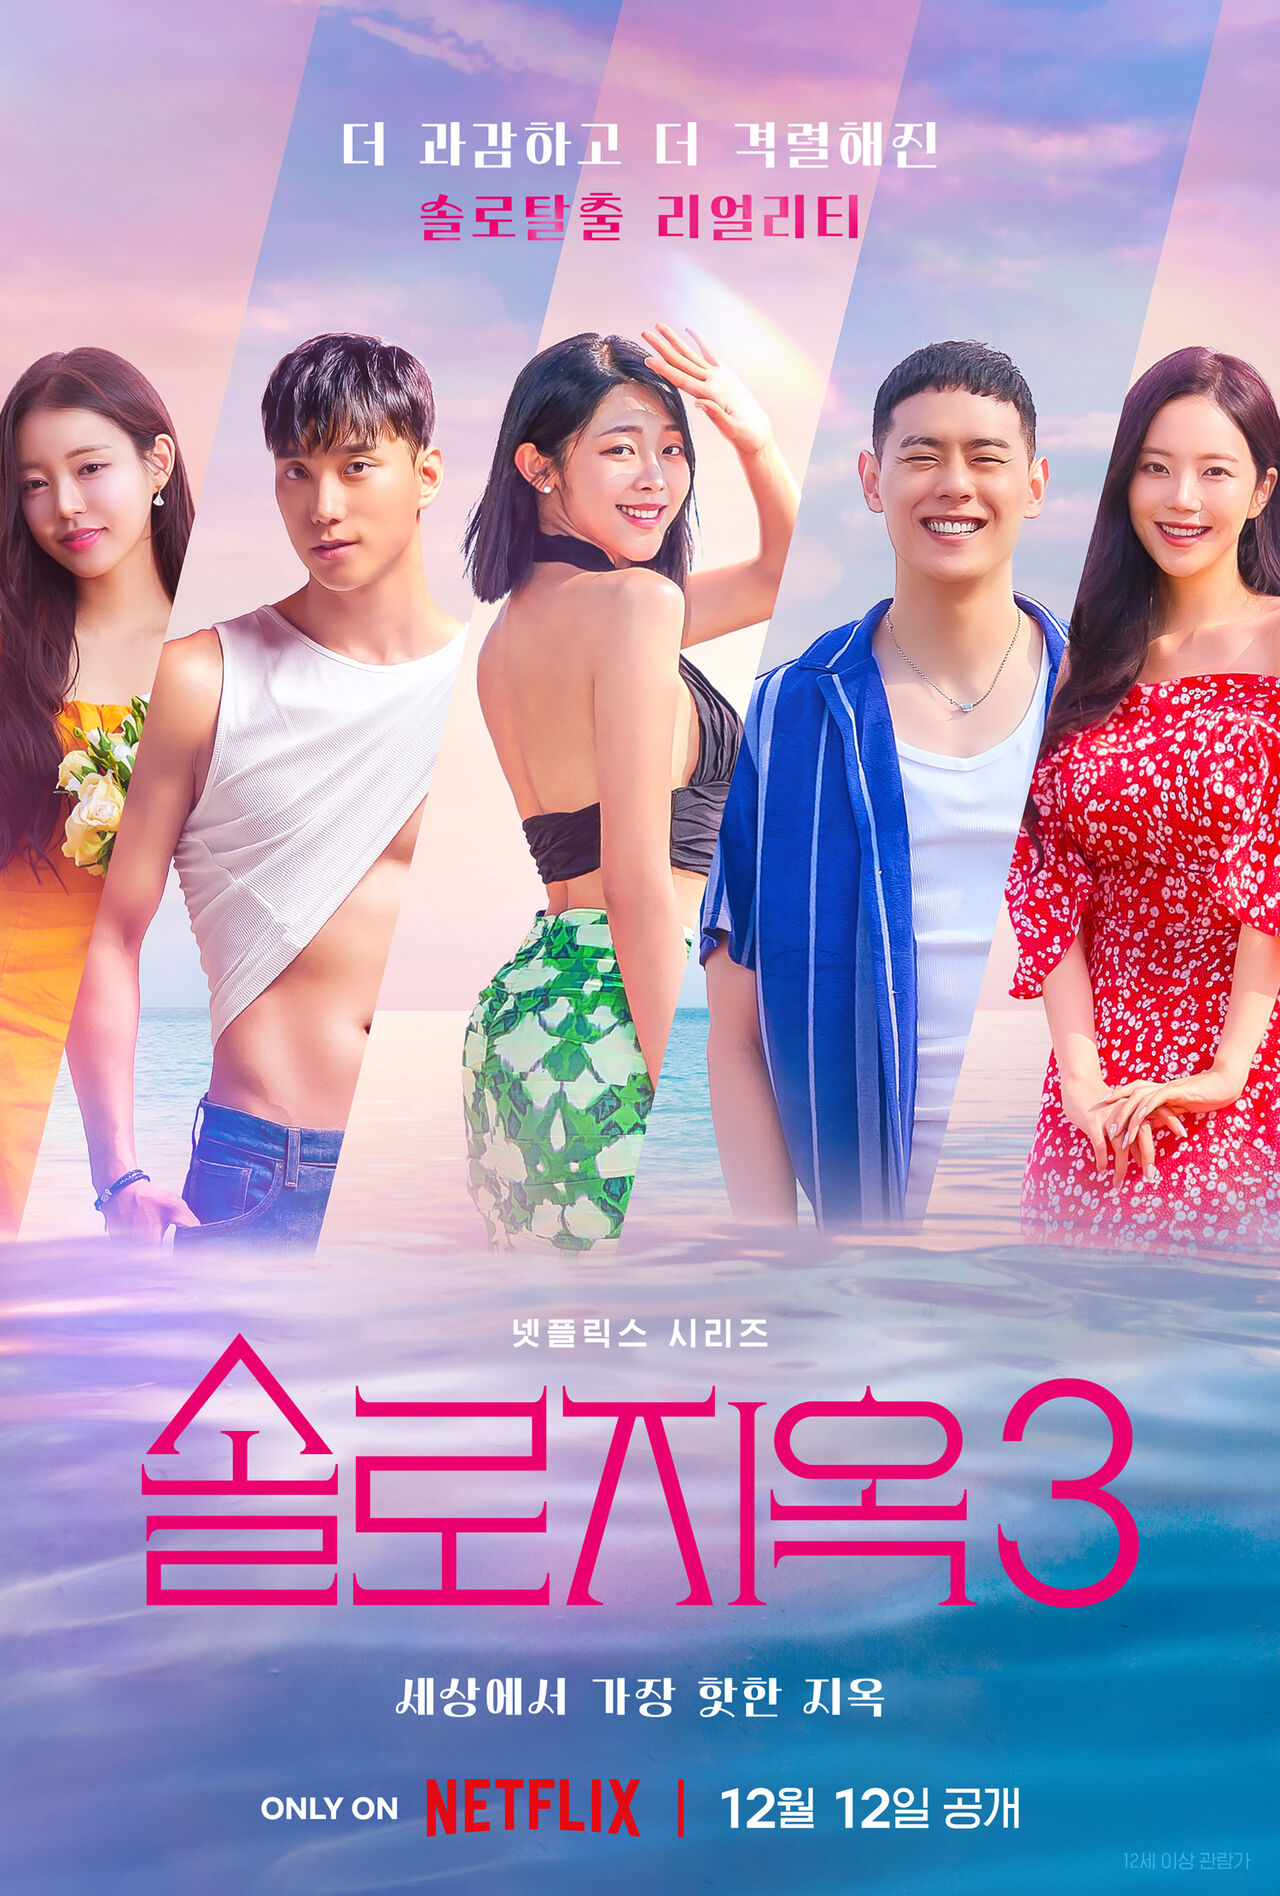 Korean Dating Shows to Watch After Netflix Single's Inferno